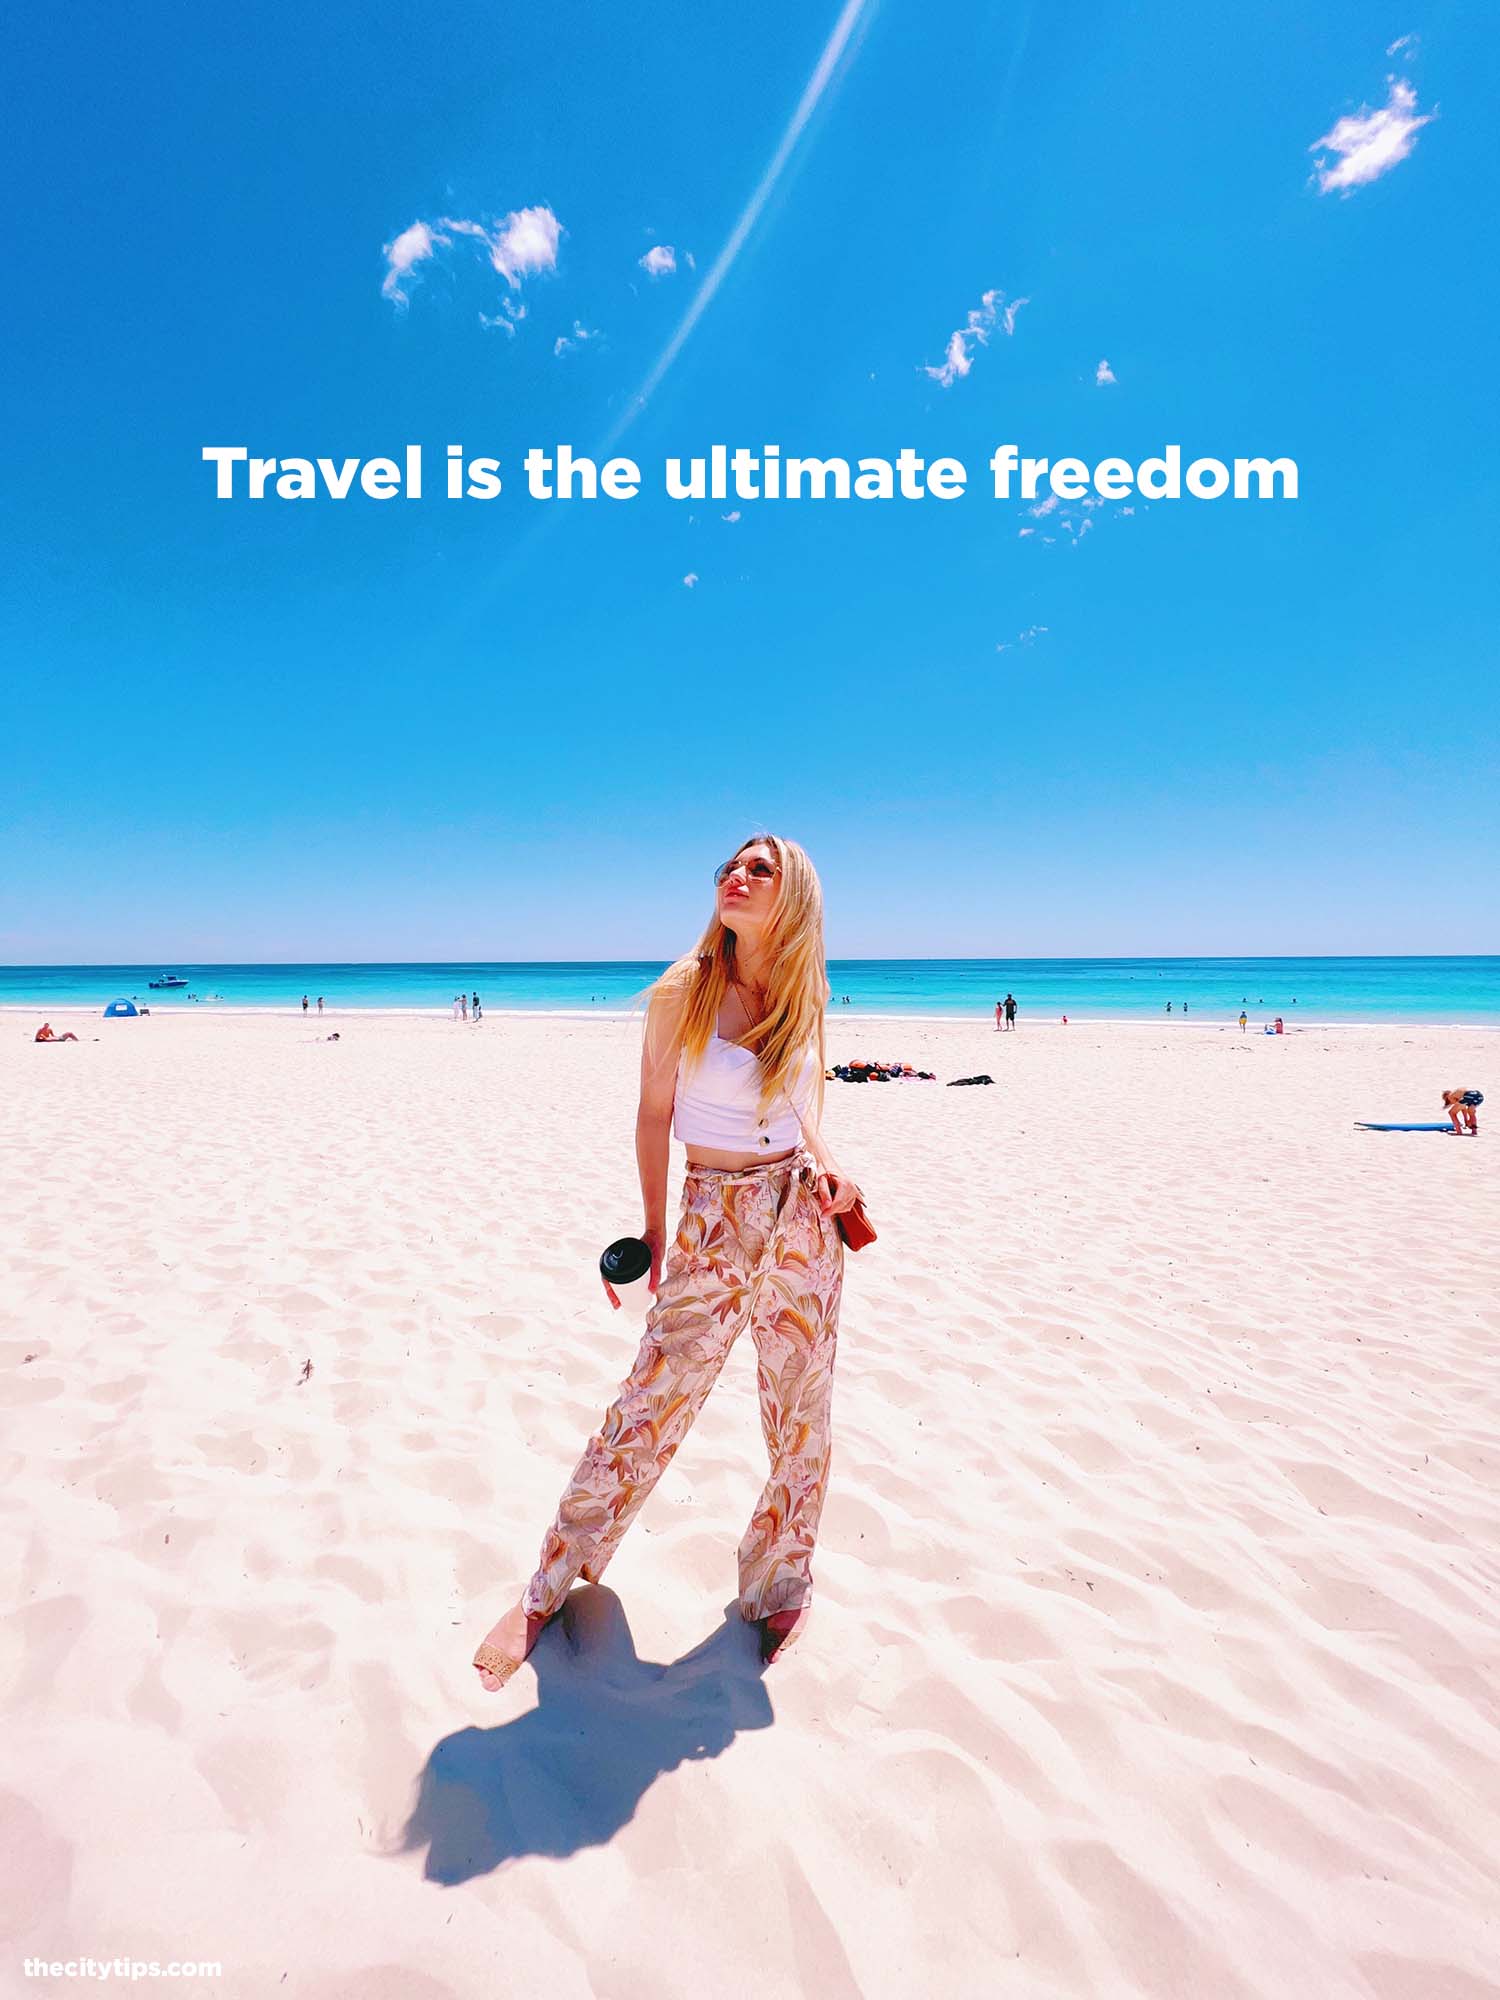 "Travel is the ultimate freedom."